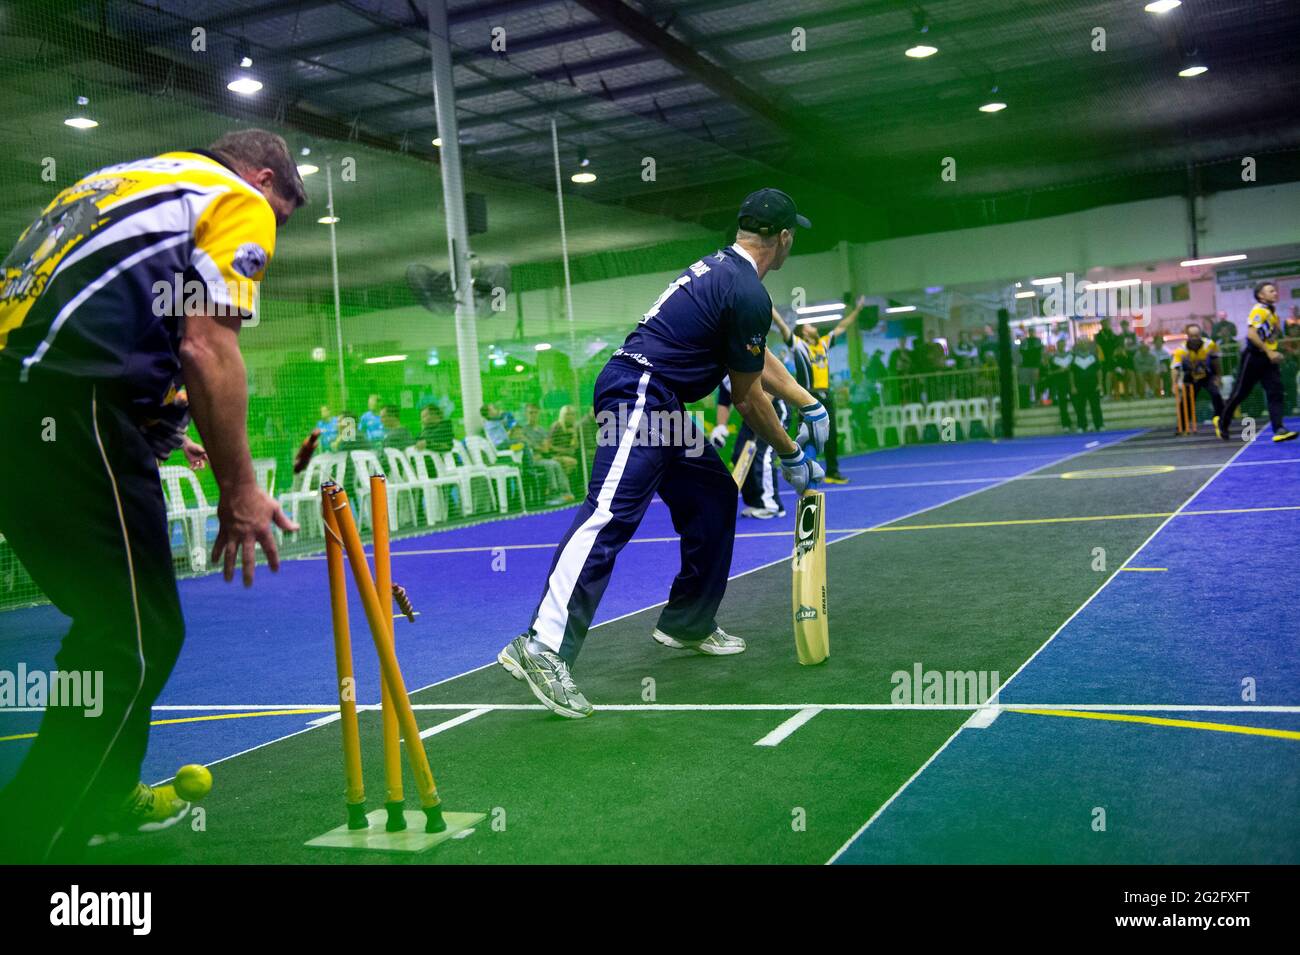 The stumps and bails fly as a batsman is Out Bowled in a game of Indoor Cricket Stock Photo